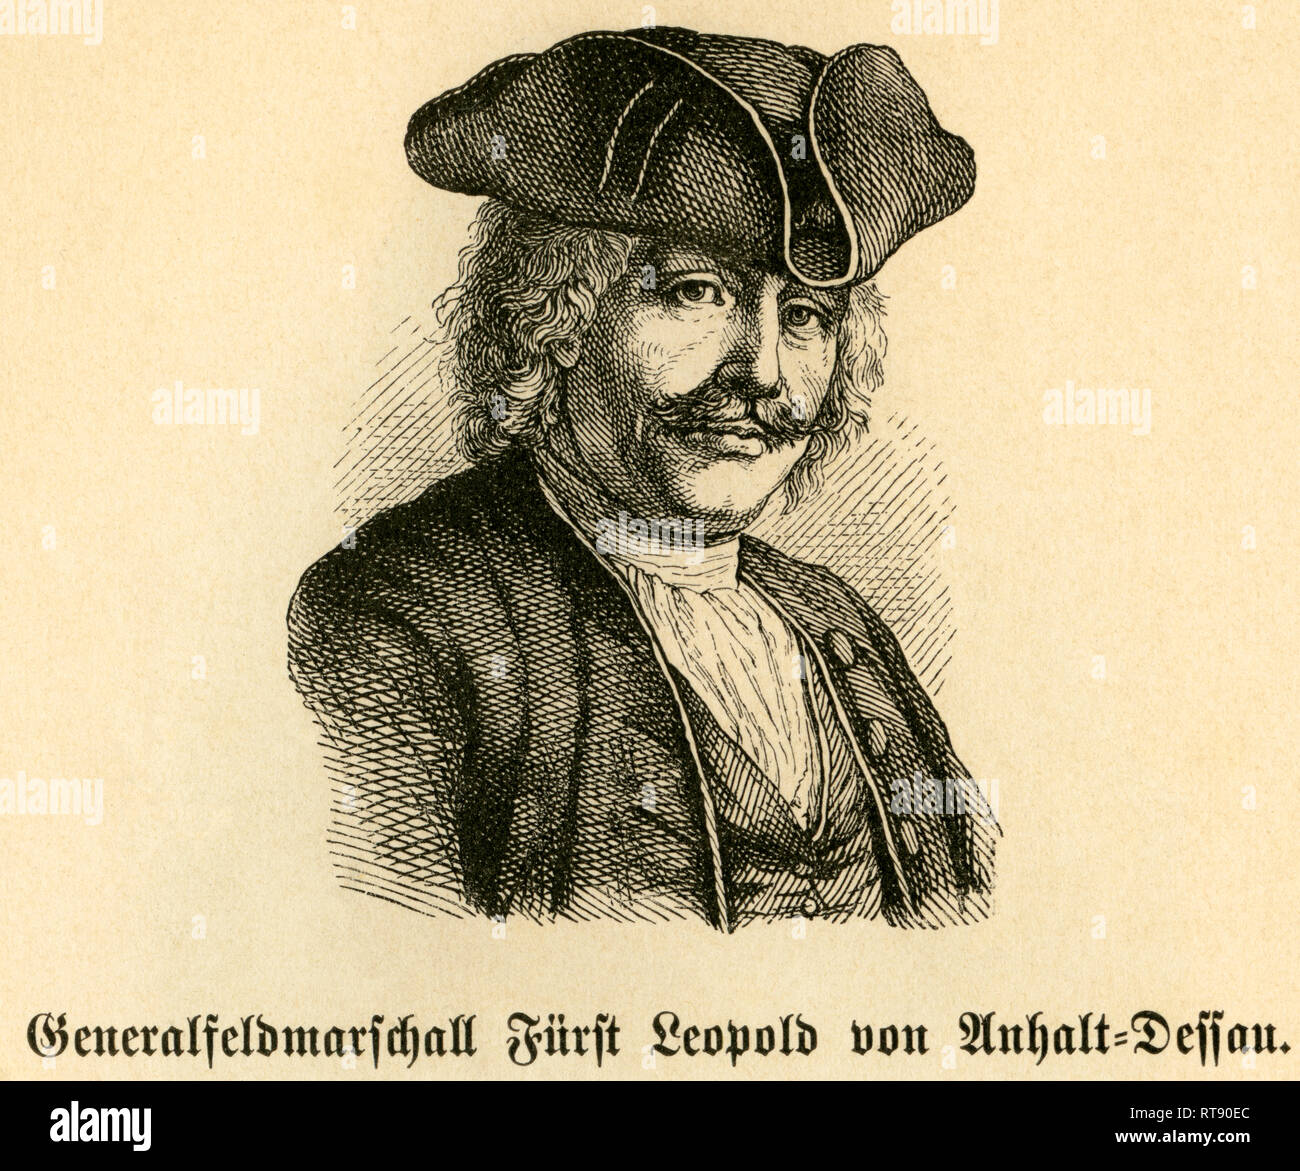 Leopold I, Prince of Anhalt-Dessau, portrait from: 'Deutsche Heerführer ', 1640-1894, portrayed by Sprößer, publishing house Ferdinand Hirt and son, Leipzig, 1895., Additional-Rights-Clearance-Info-Not-Available Stock Photo